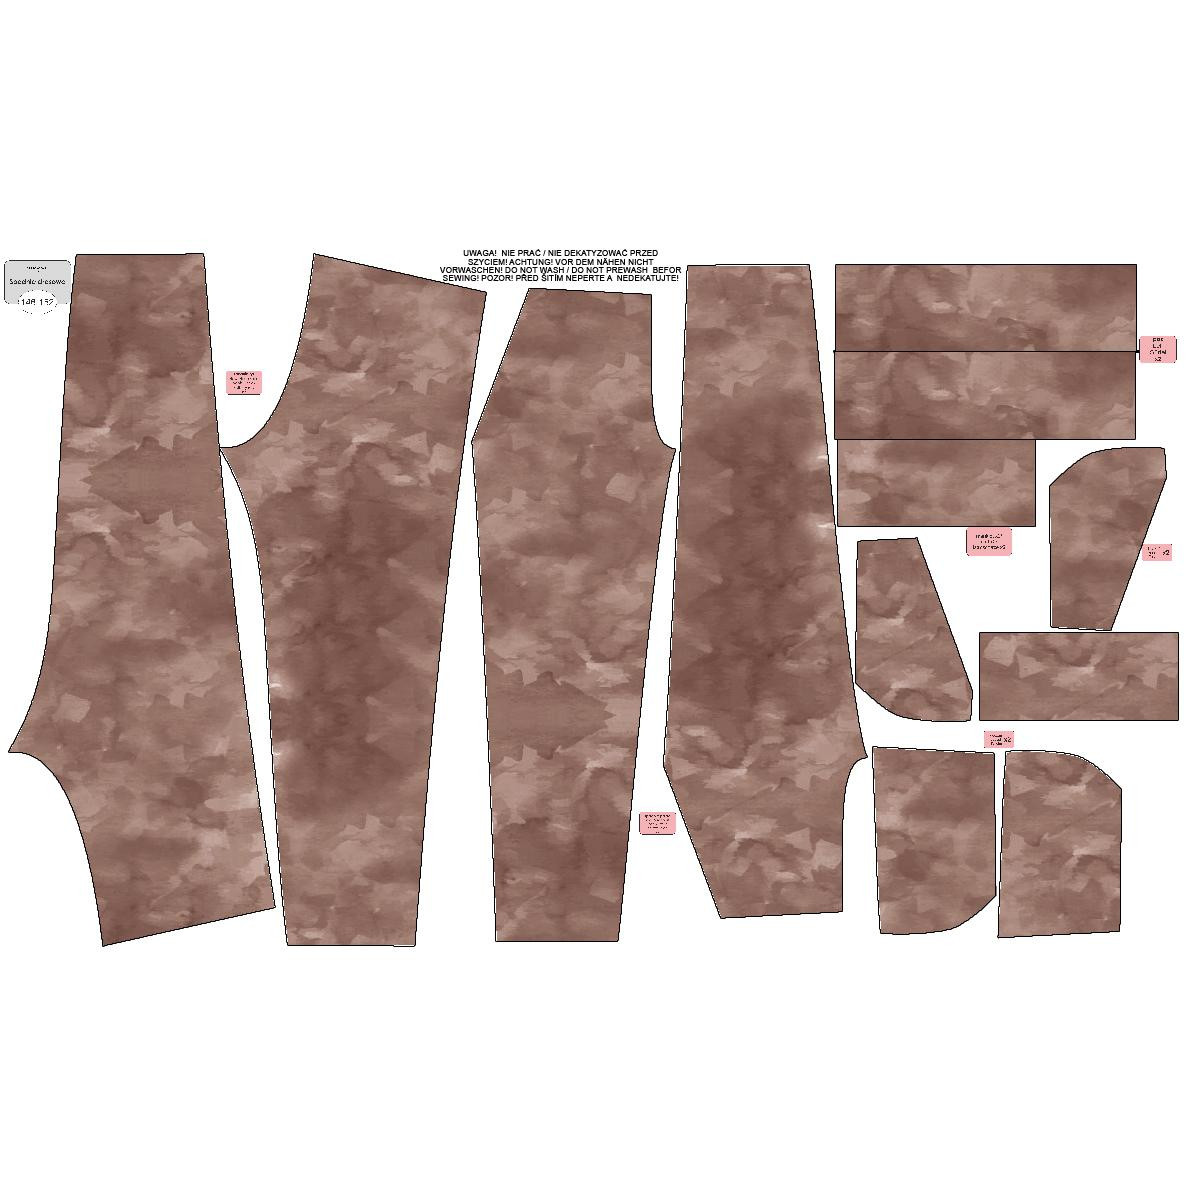 CHILDREN'S JOGGERS (LYON) - CAMOUFLAGE pat. 2 (brown) - looped knit fabric